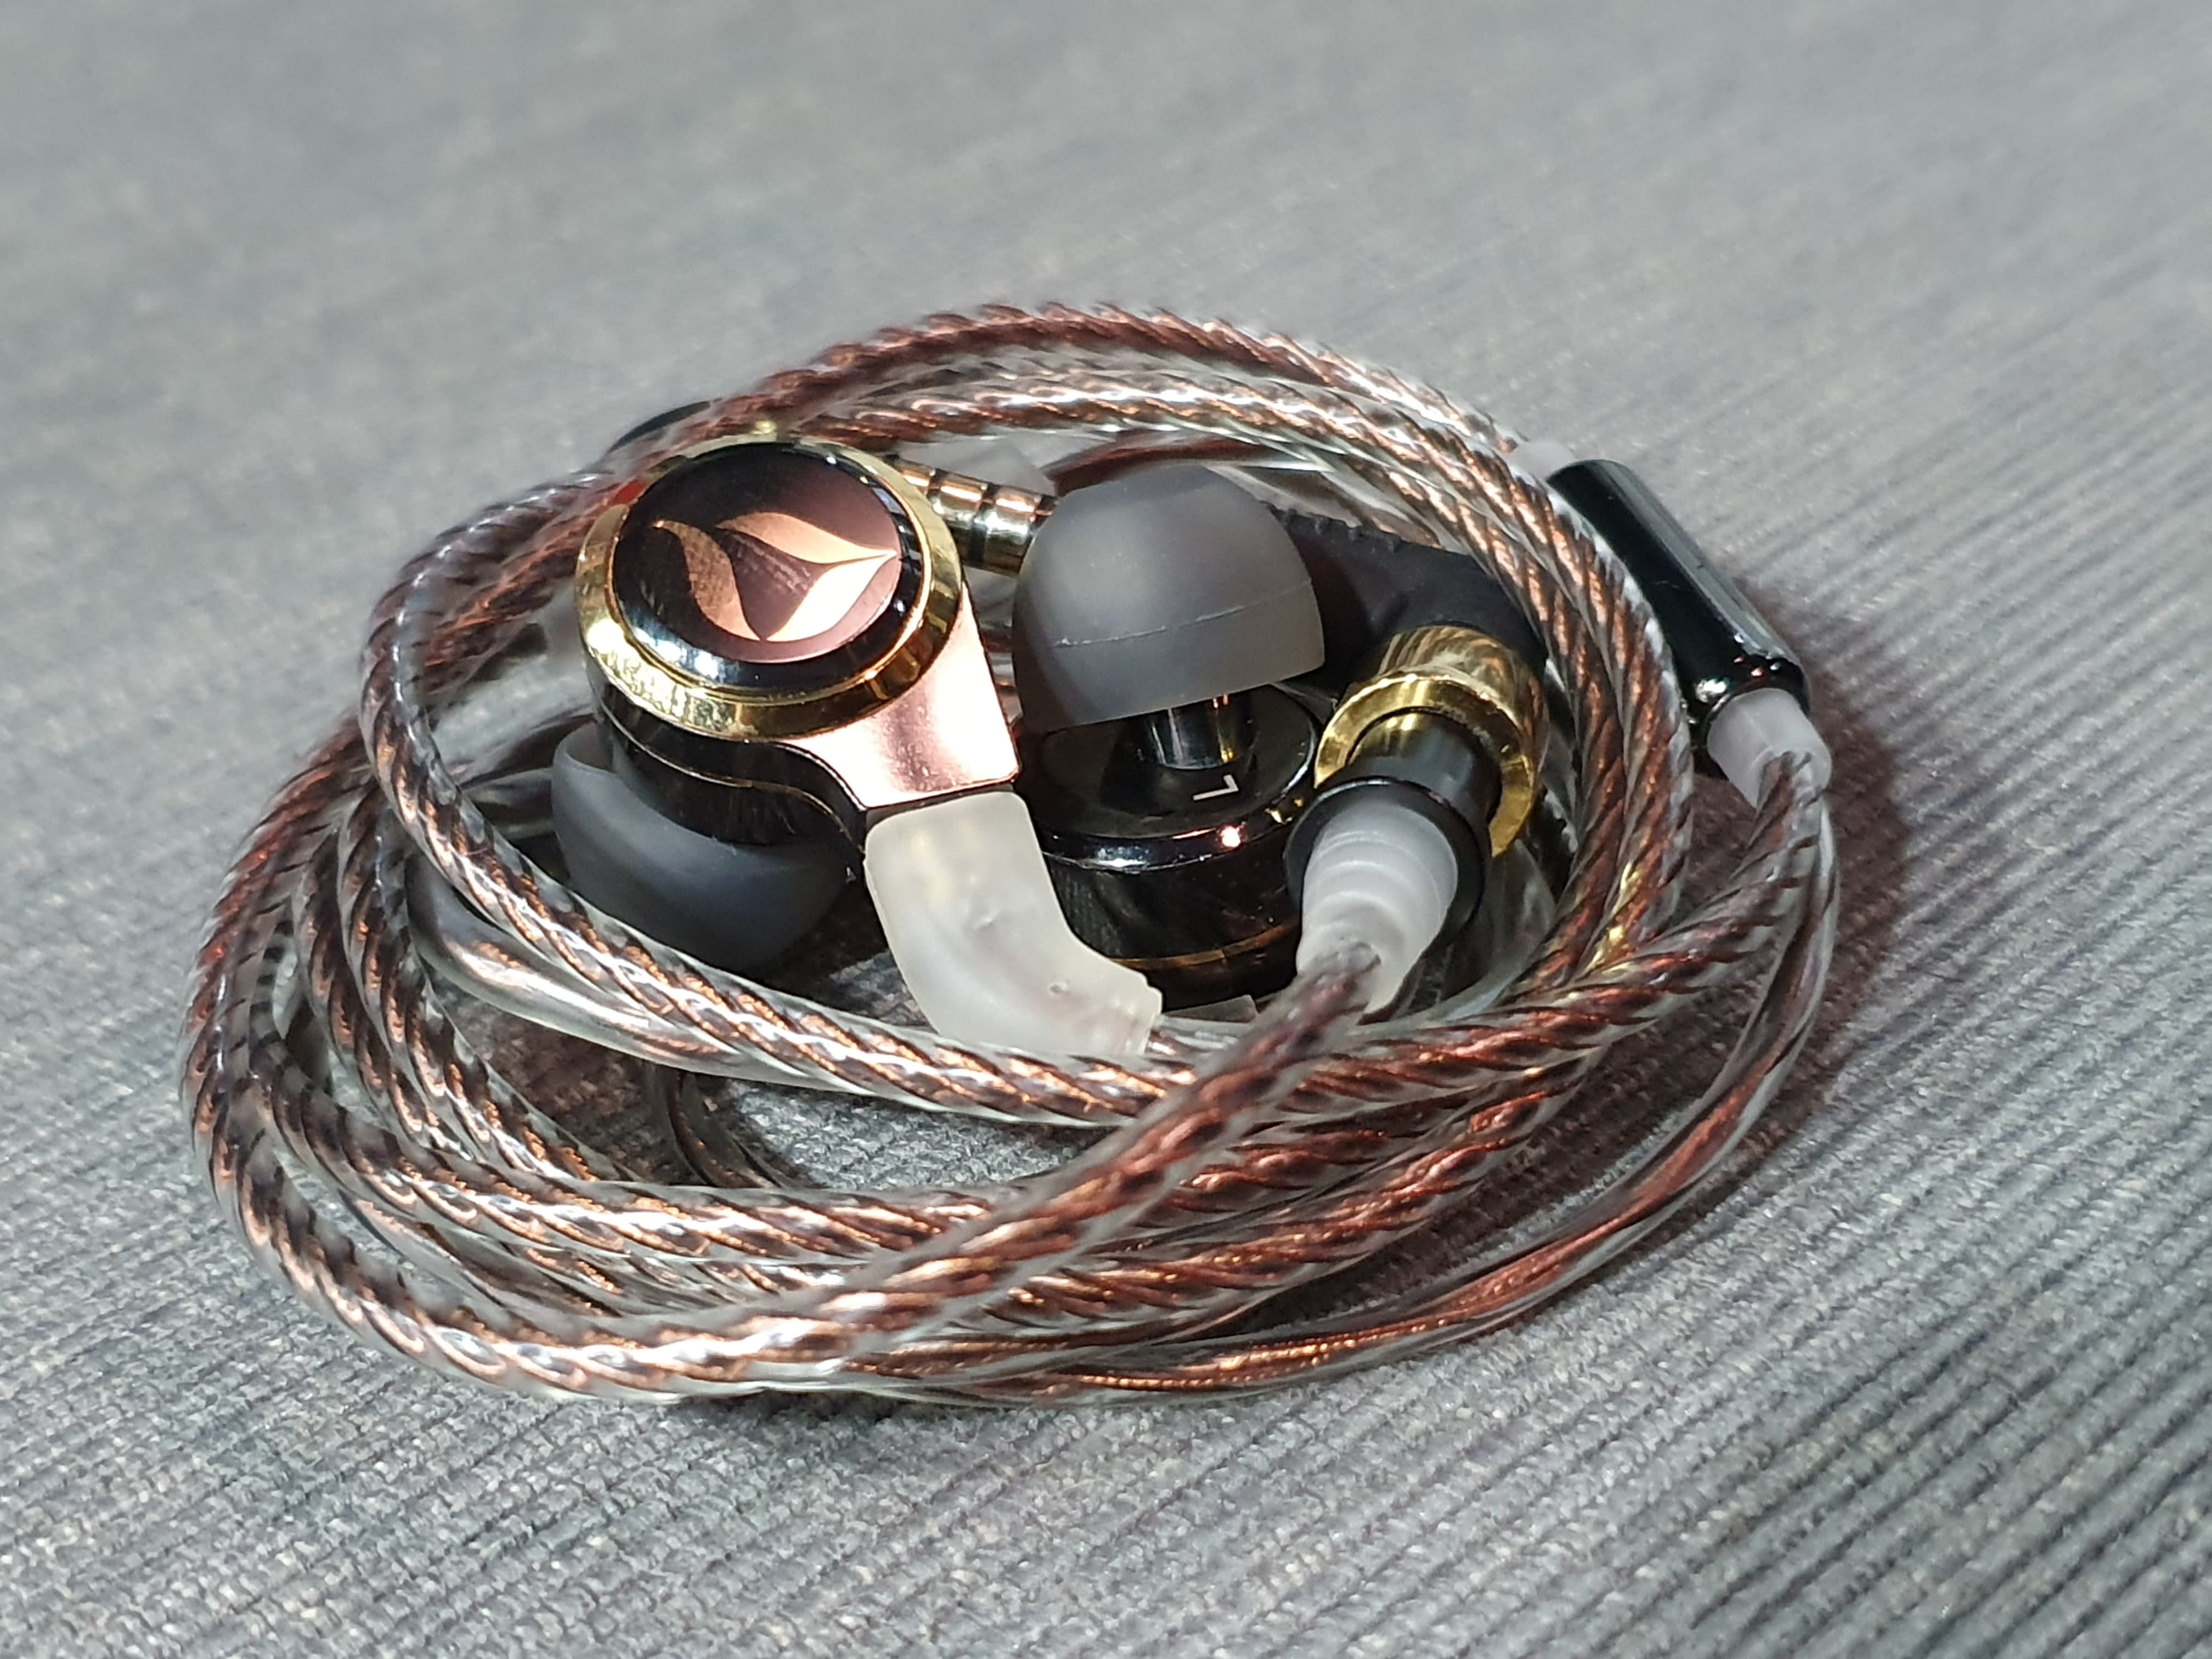 Cliffnotes] Dita Dream XLS: Xtra Low Satisfaction – In-Ear Fidelity